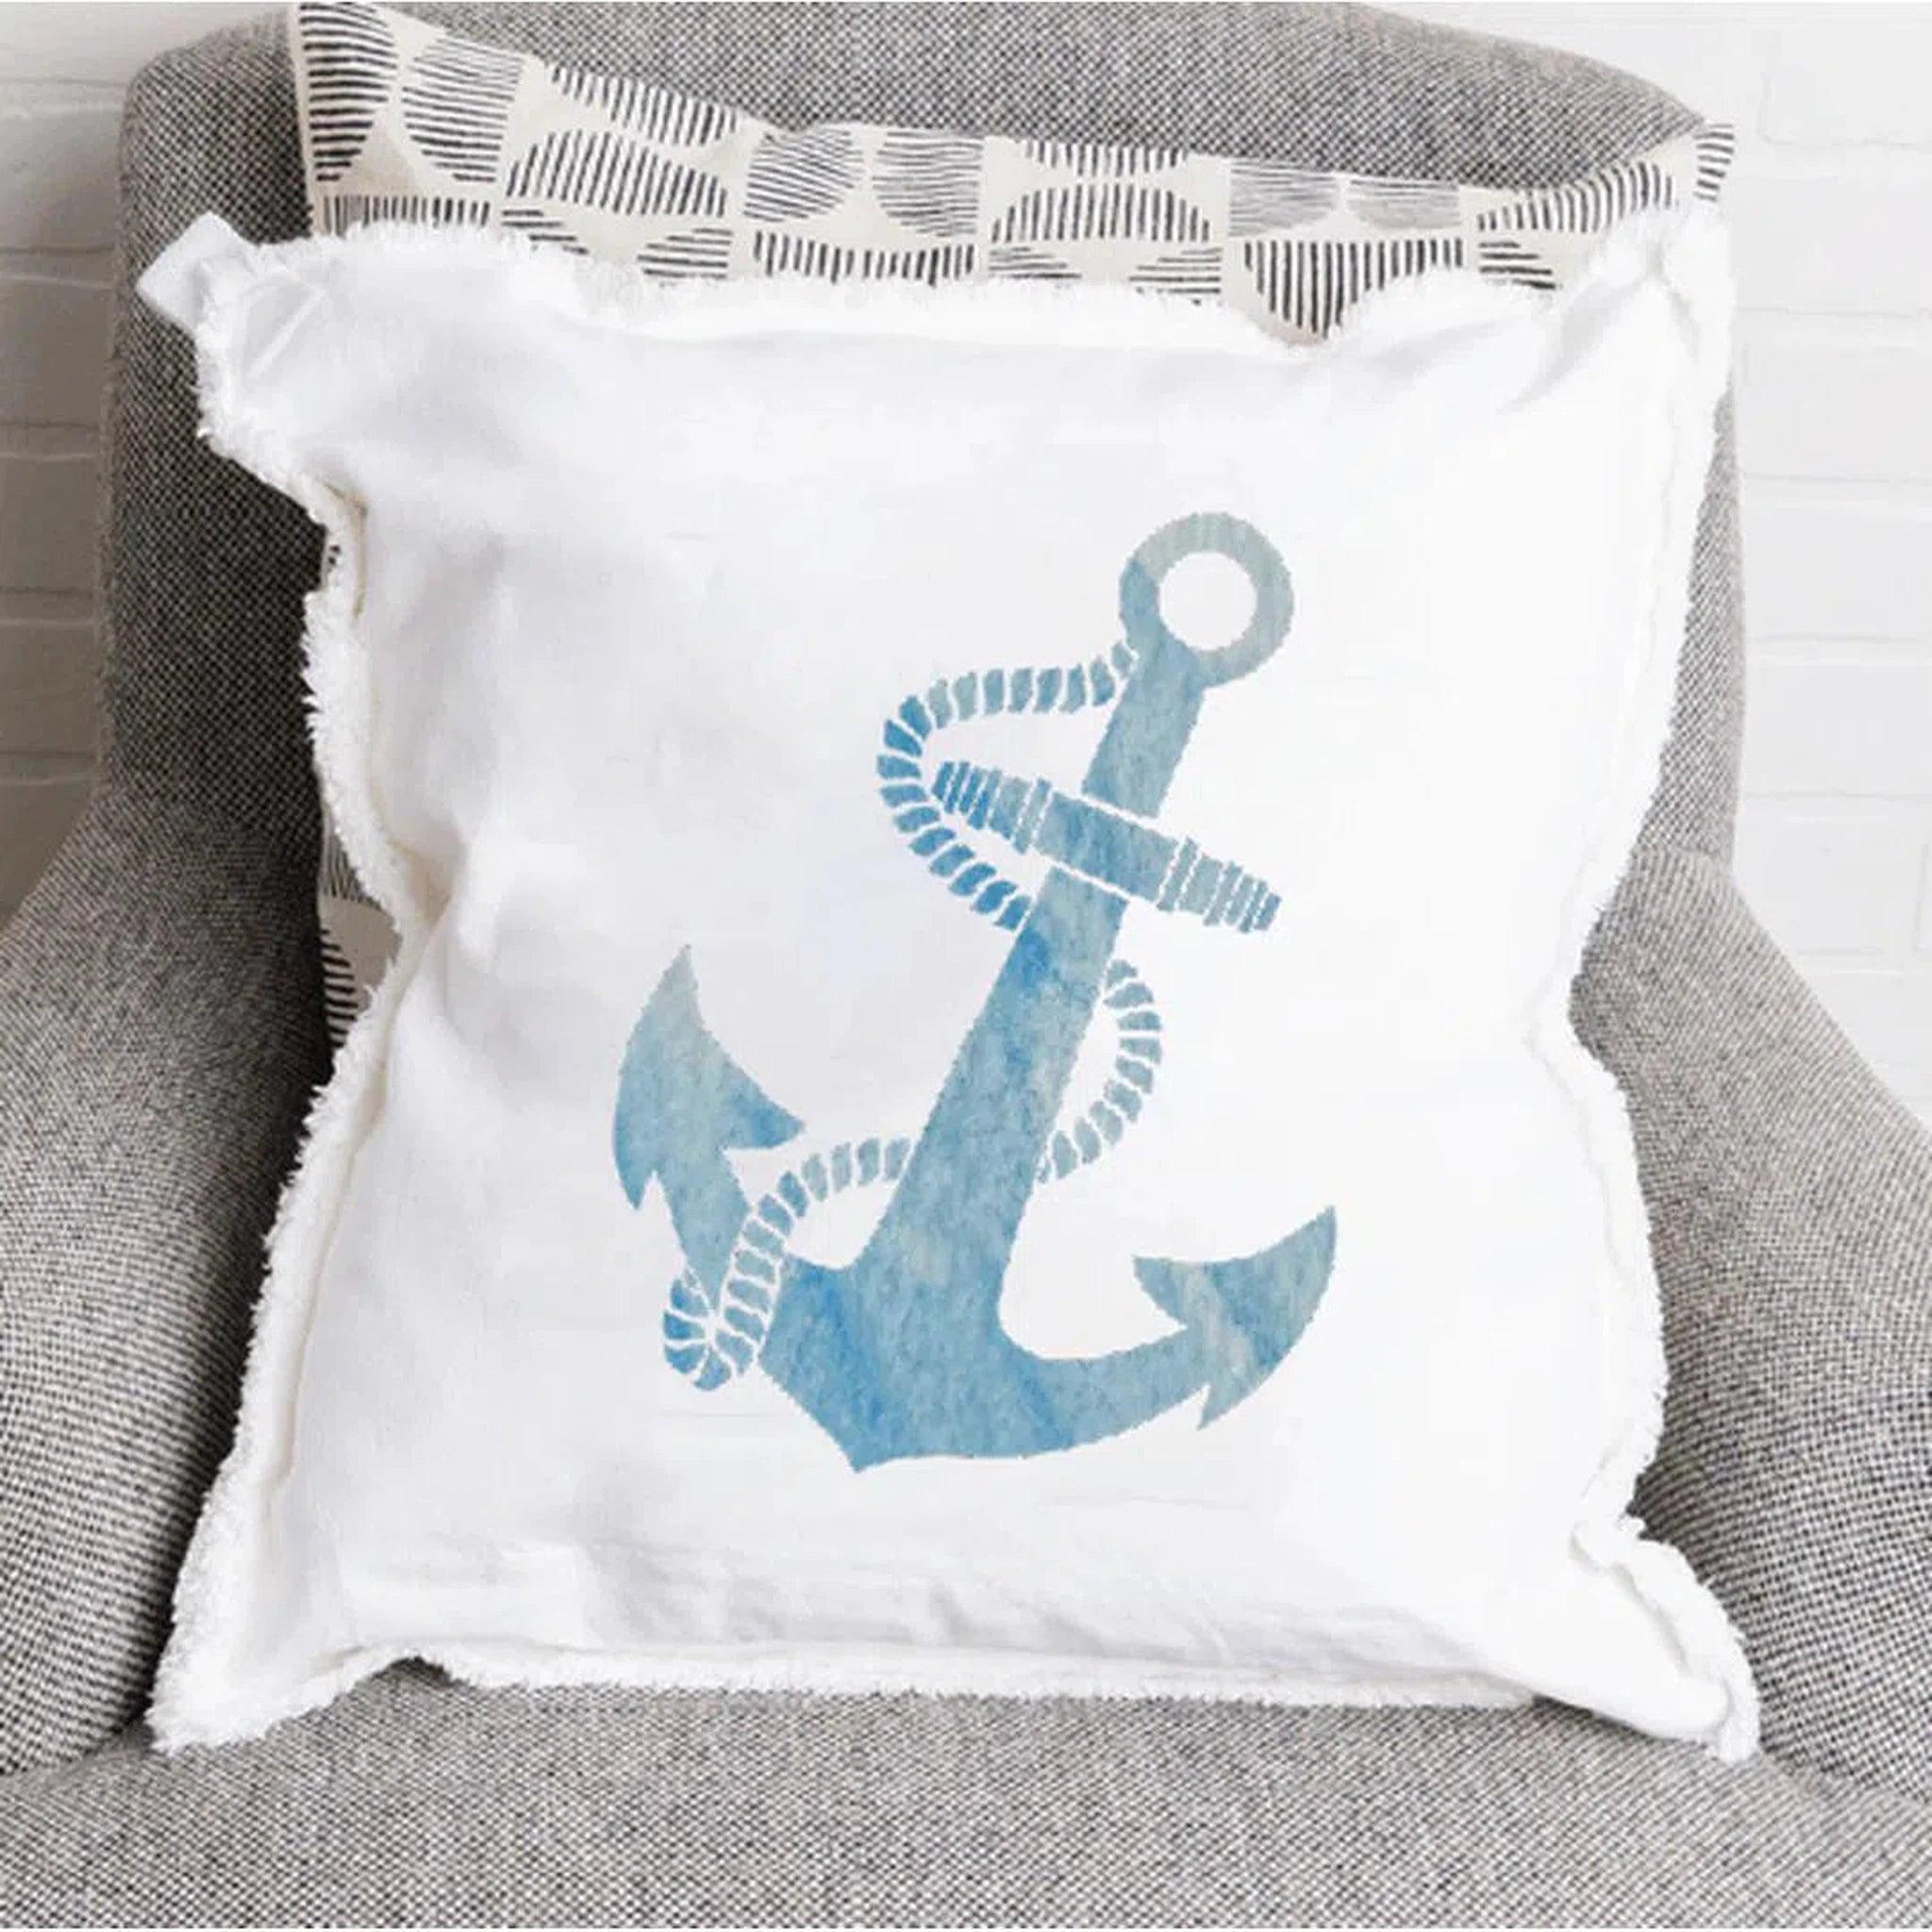 Anchor Square Pillow